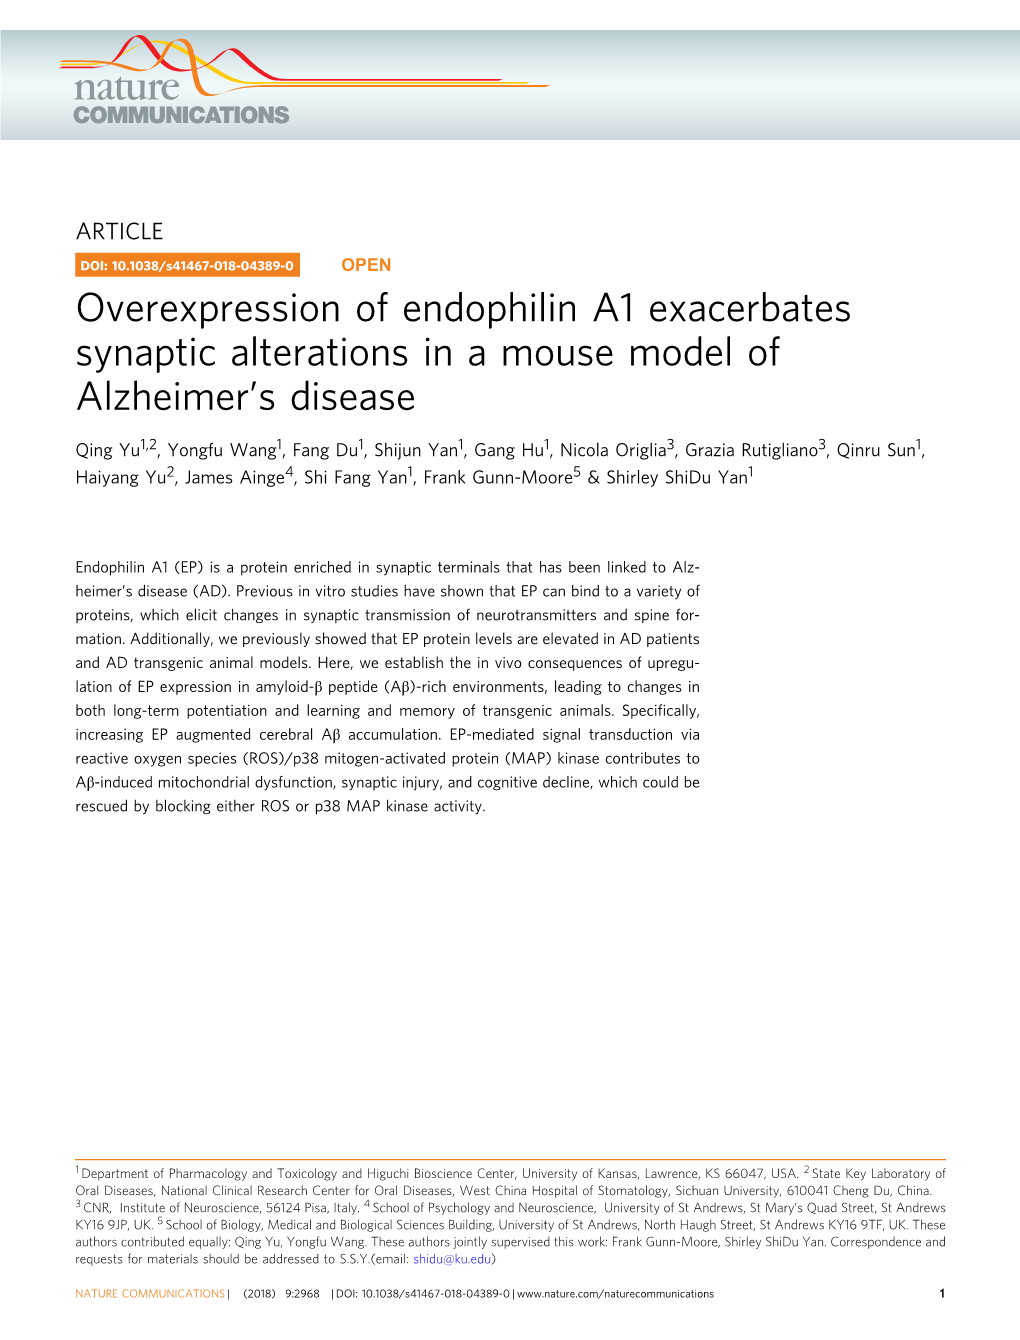 Overexpression of Endophilin A1 Exacerbates Synaptic Alterations in a Mouse Model of Alzheimer’S Disease